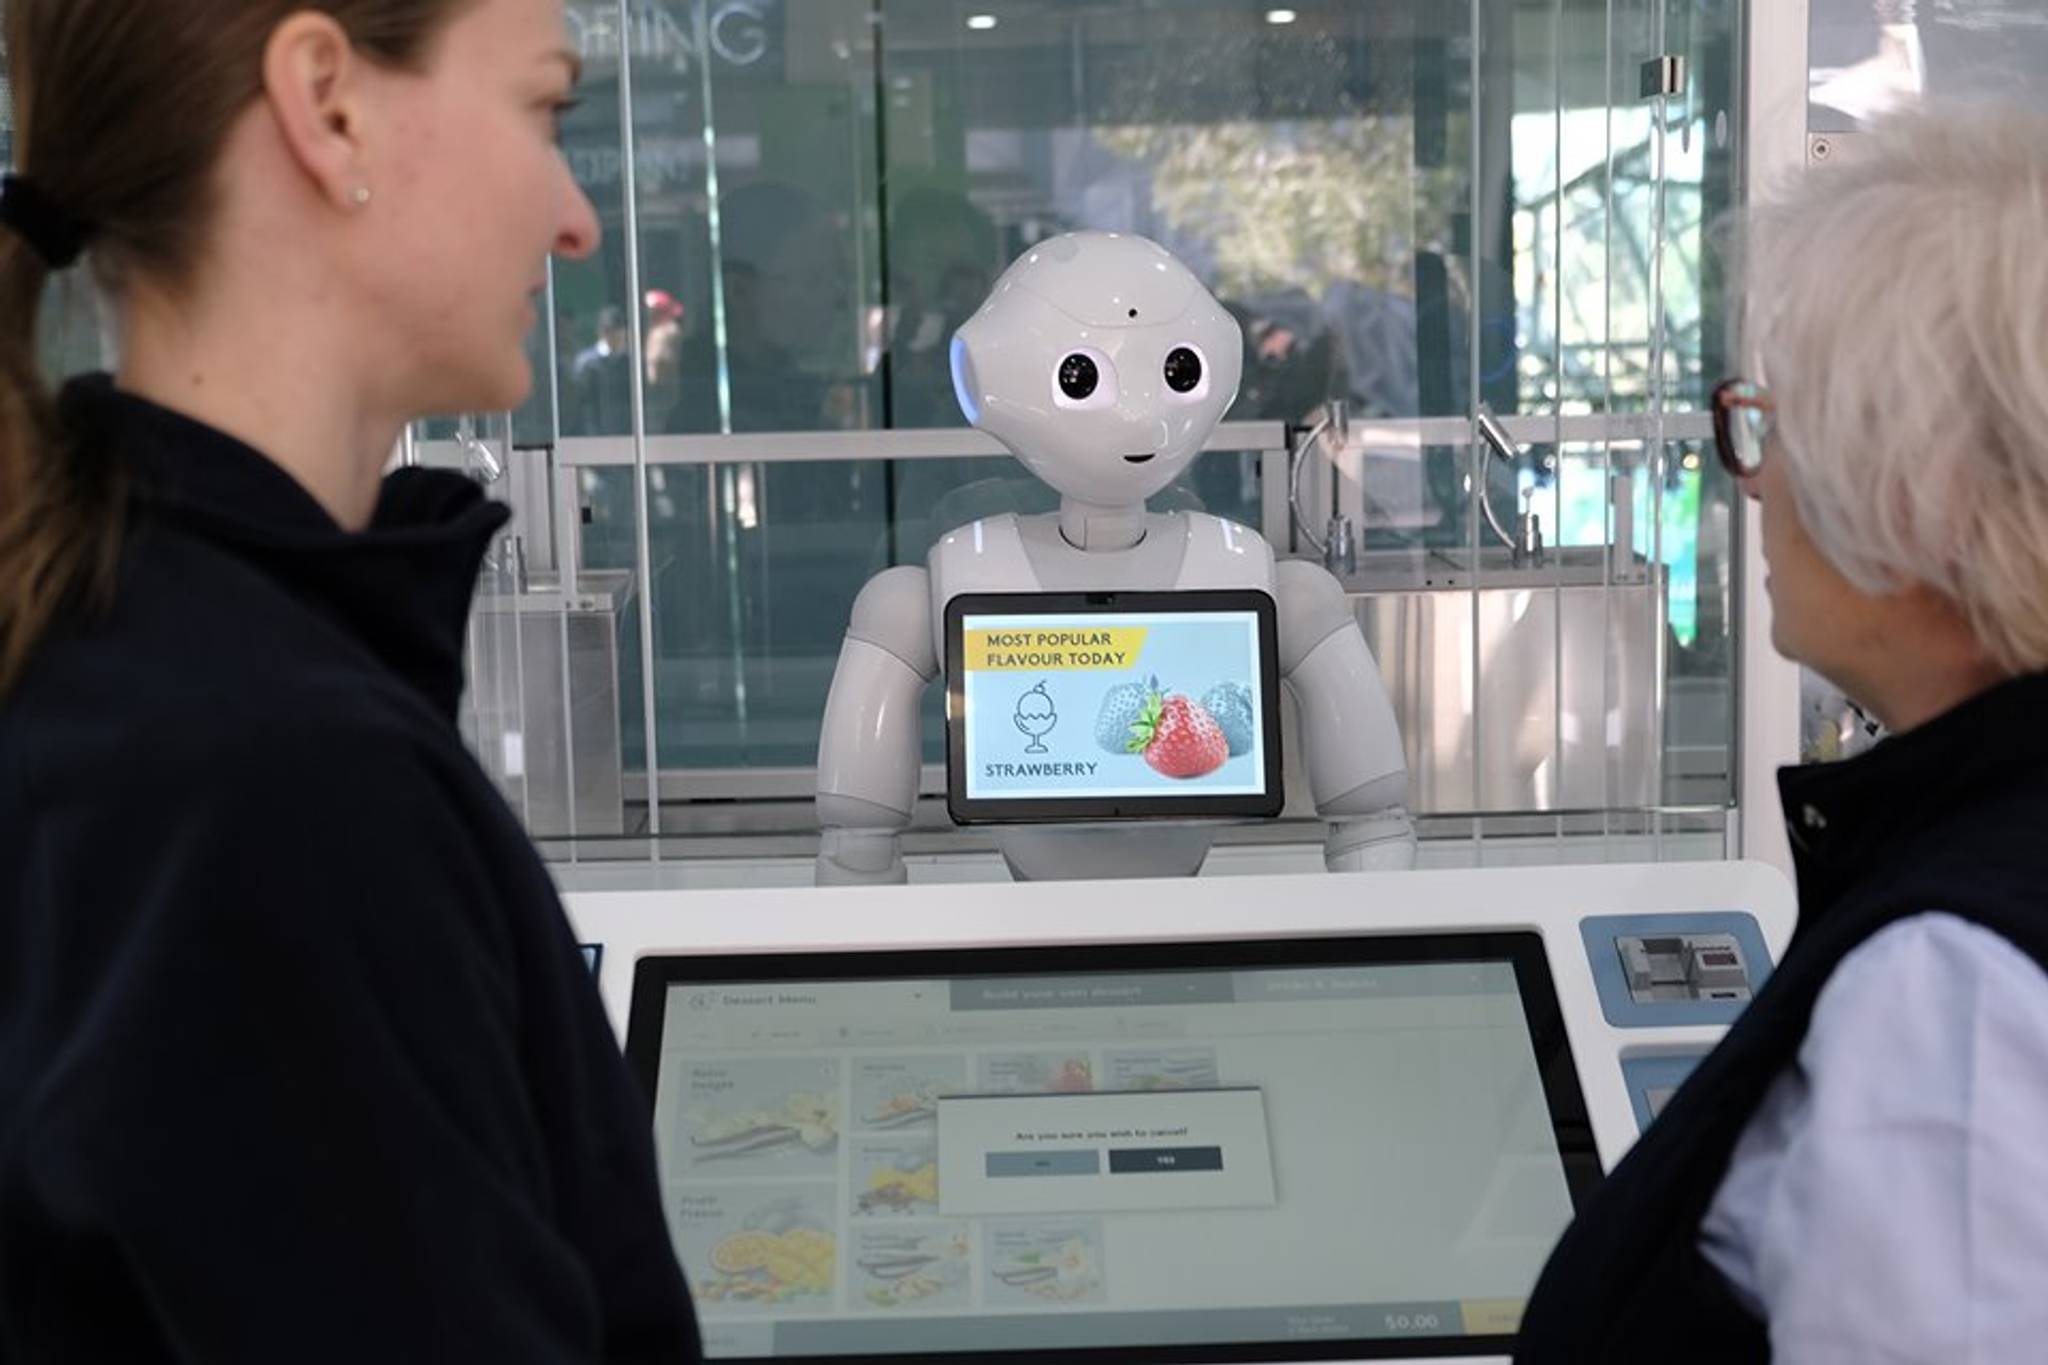 Robot ice-cream staff eases AI fears for Australians